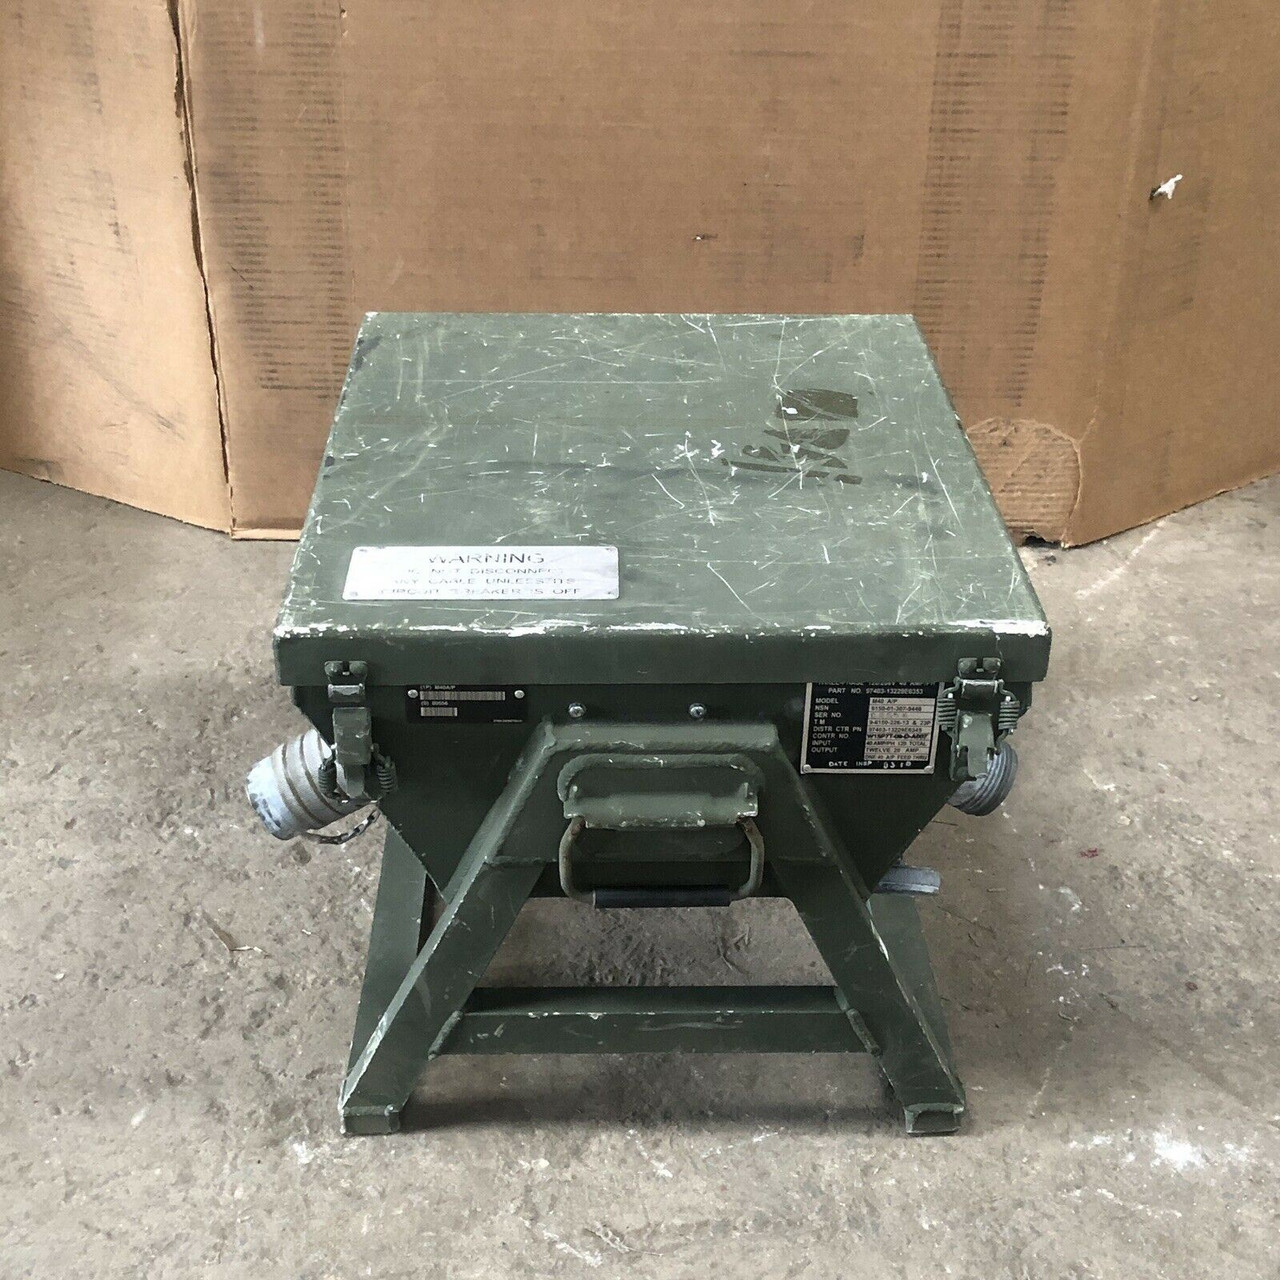 Military 3-Phase Power Distribution Circuit Breaker System M40 A/P 13229E6353